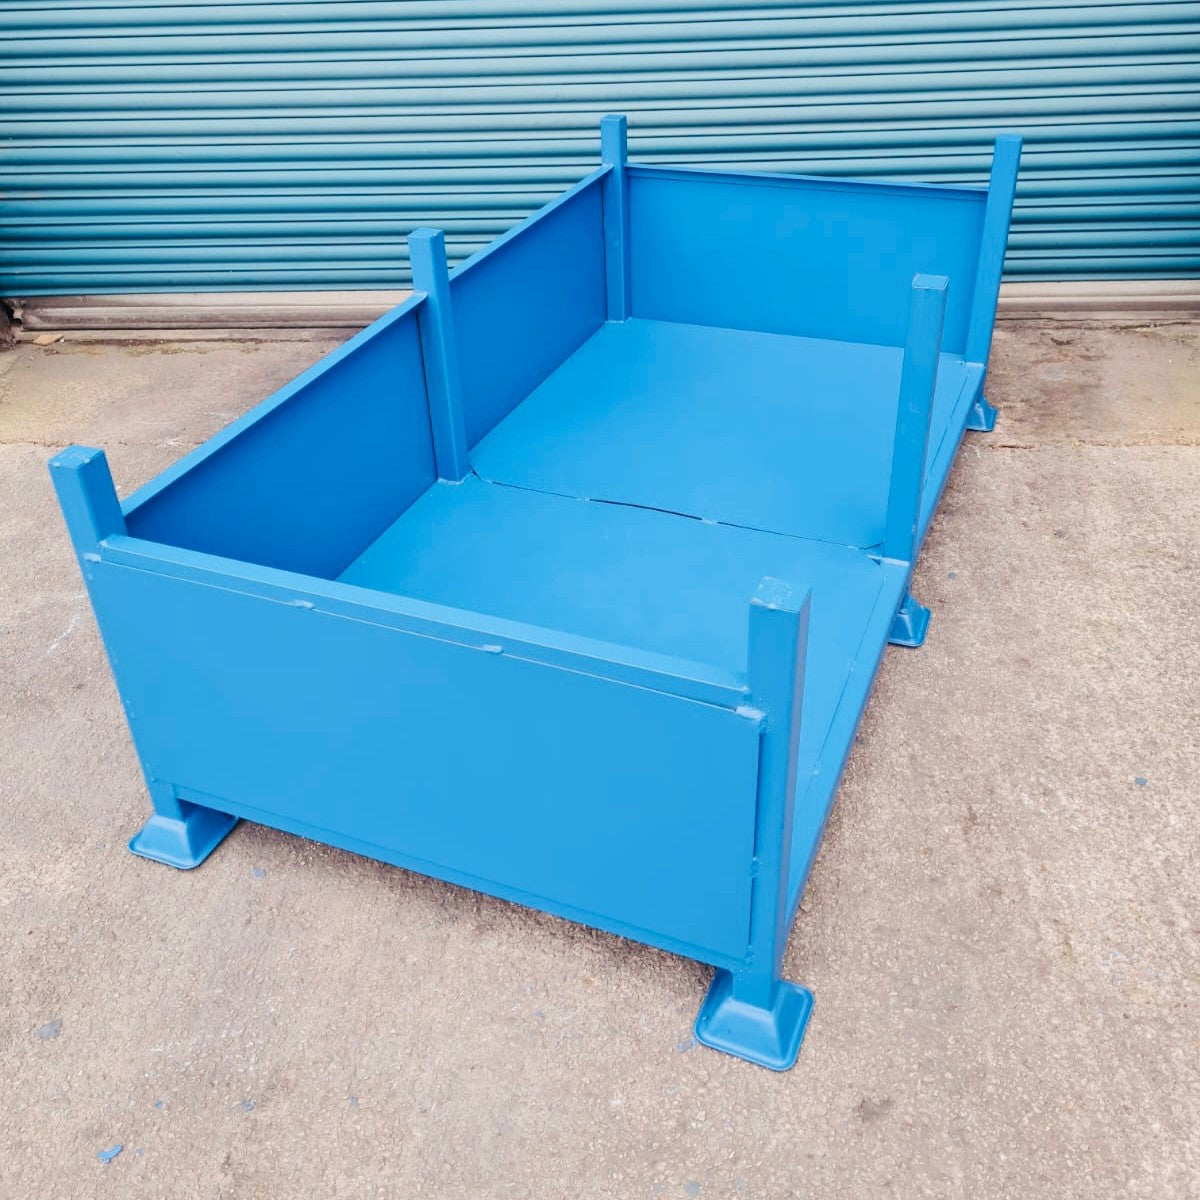 Double width stillages for storing and stacking goods